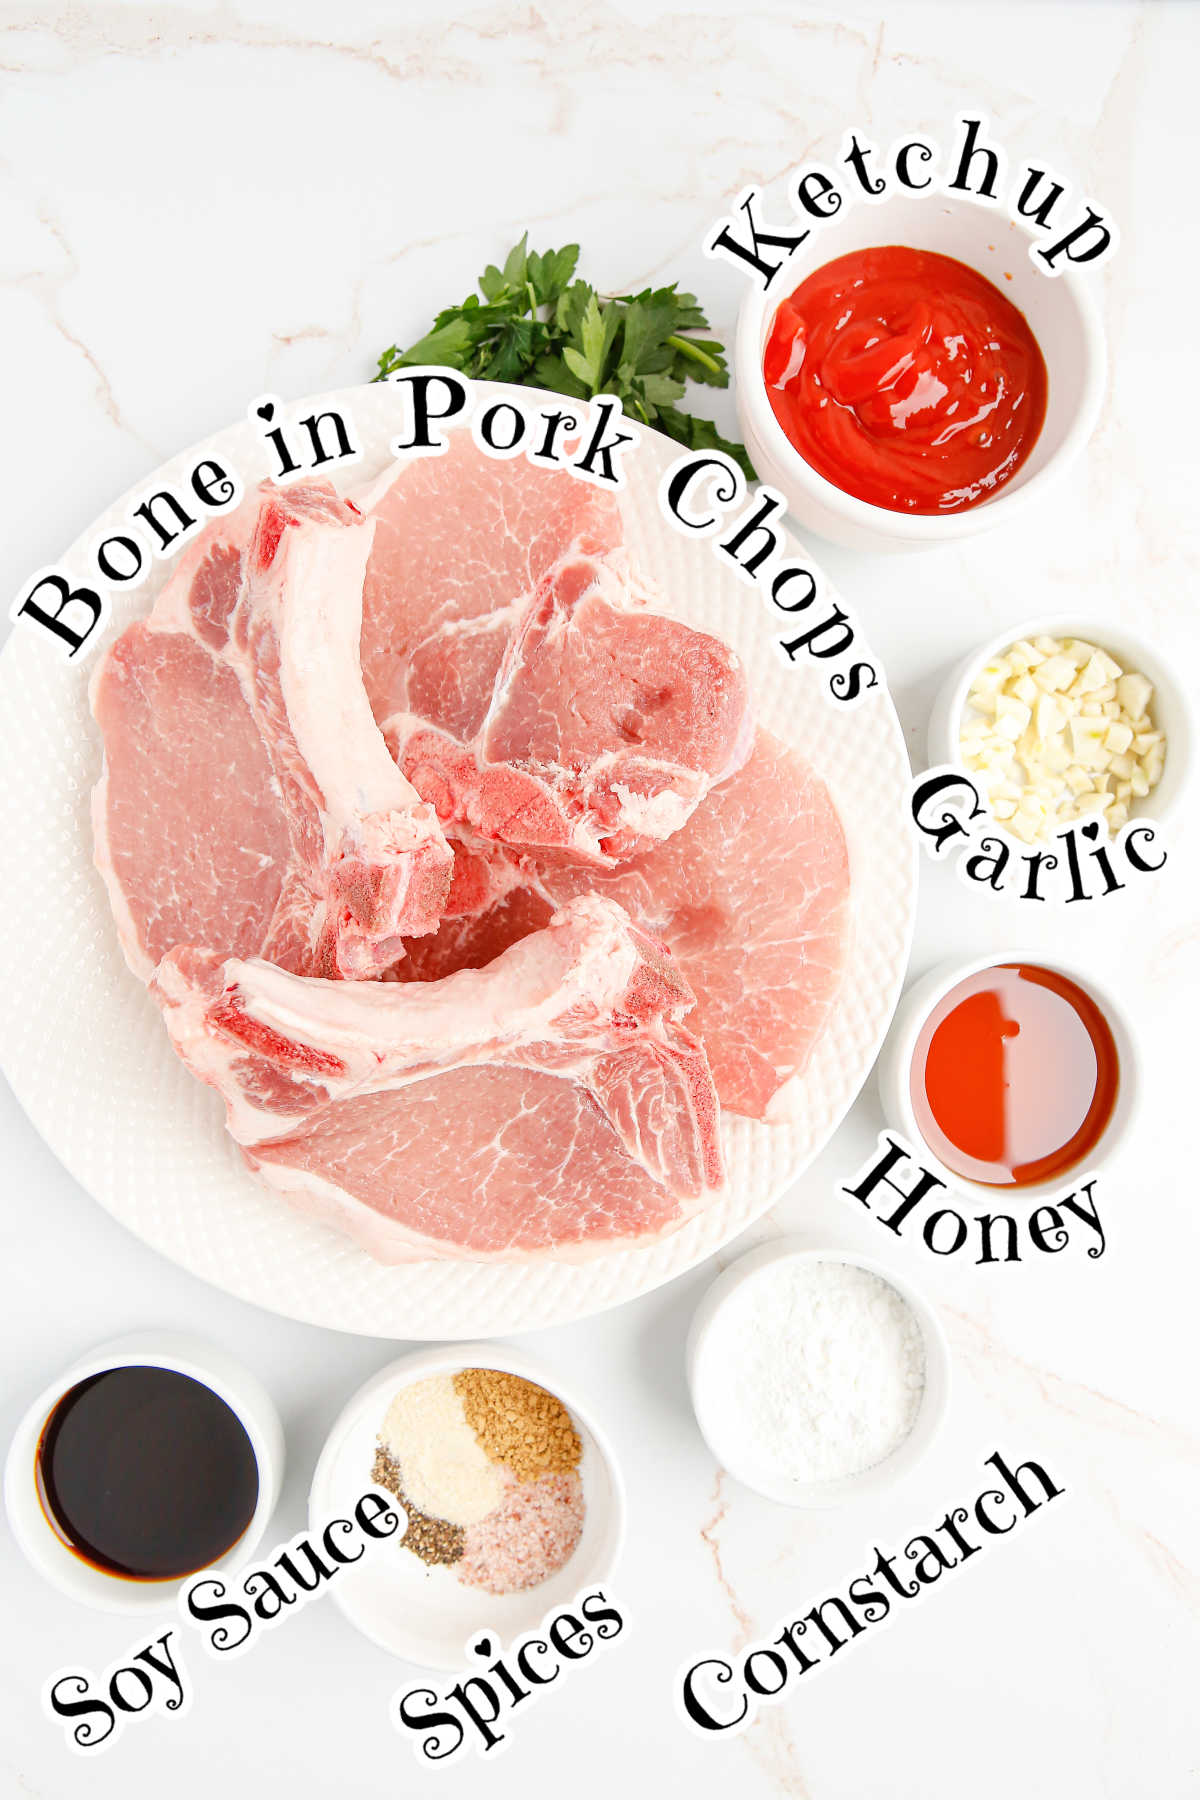 Labeled ingredients for this glazed pork chop recipe.